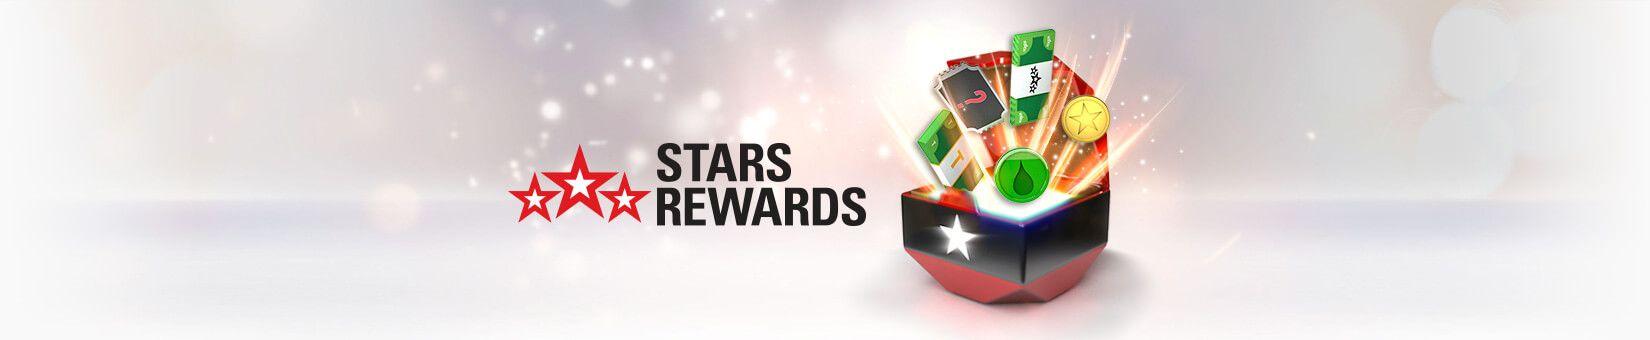 Staples Stars Logo - Stars Rewards - Frequently Asked Questions